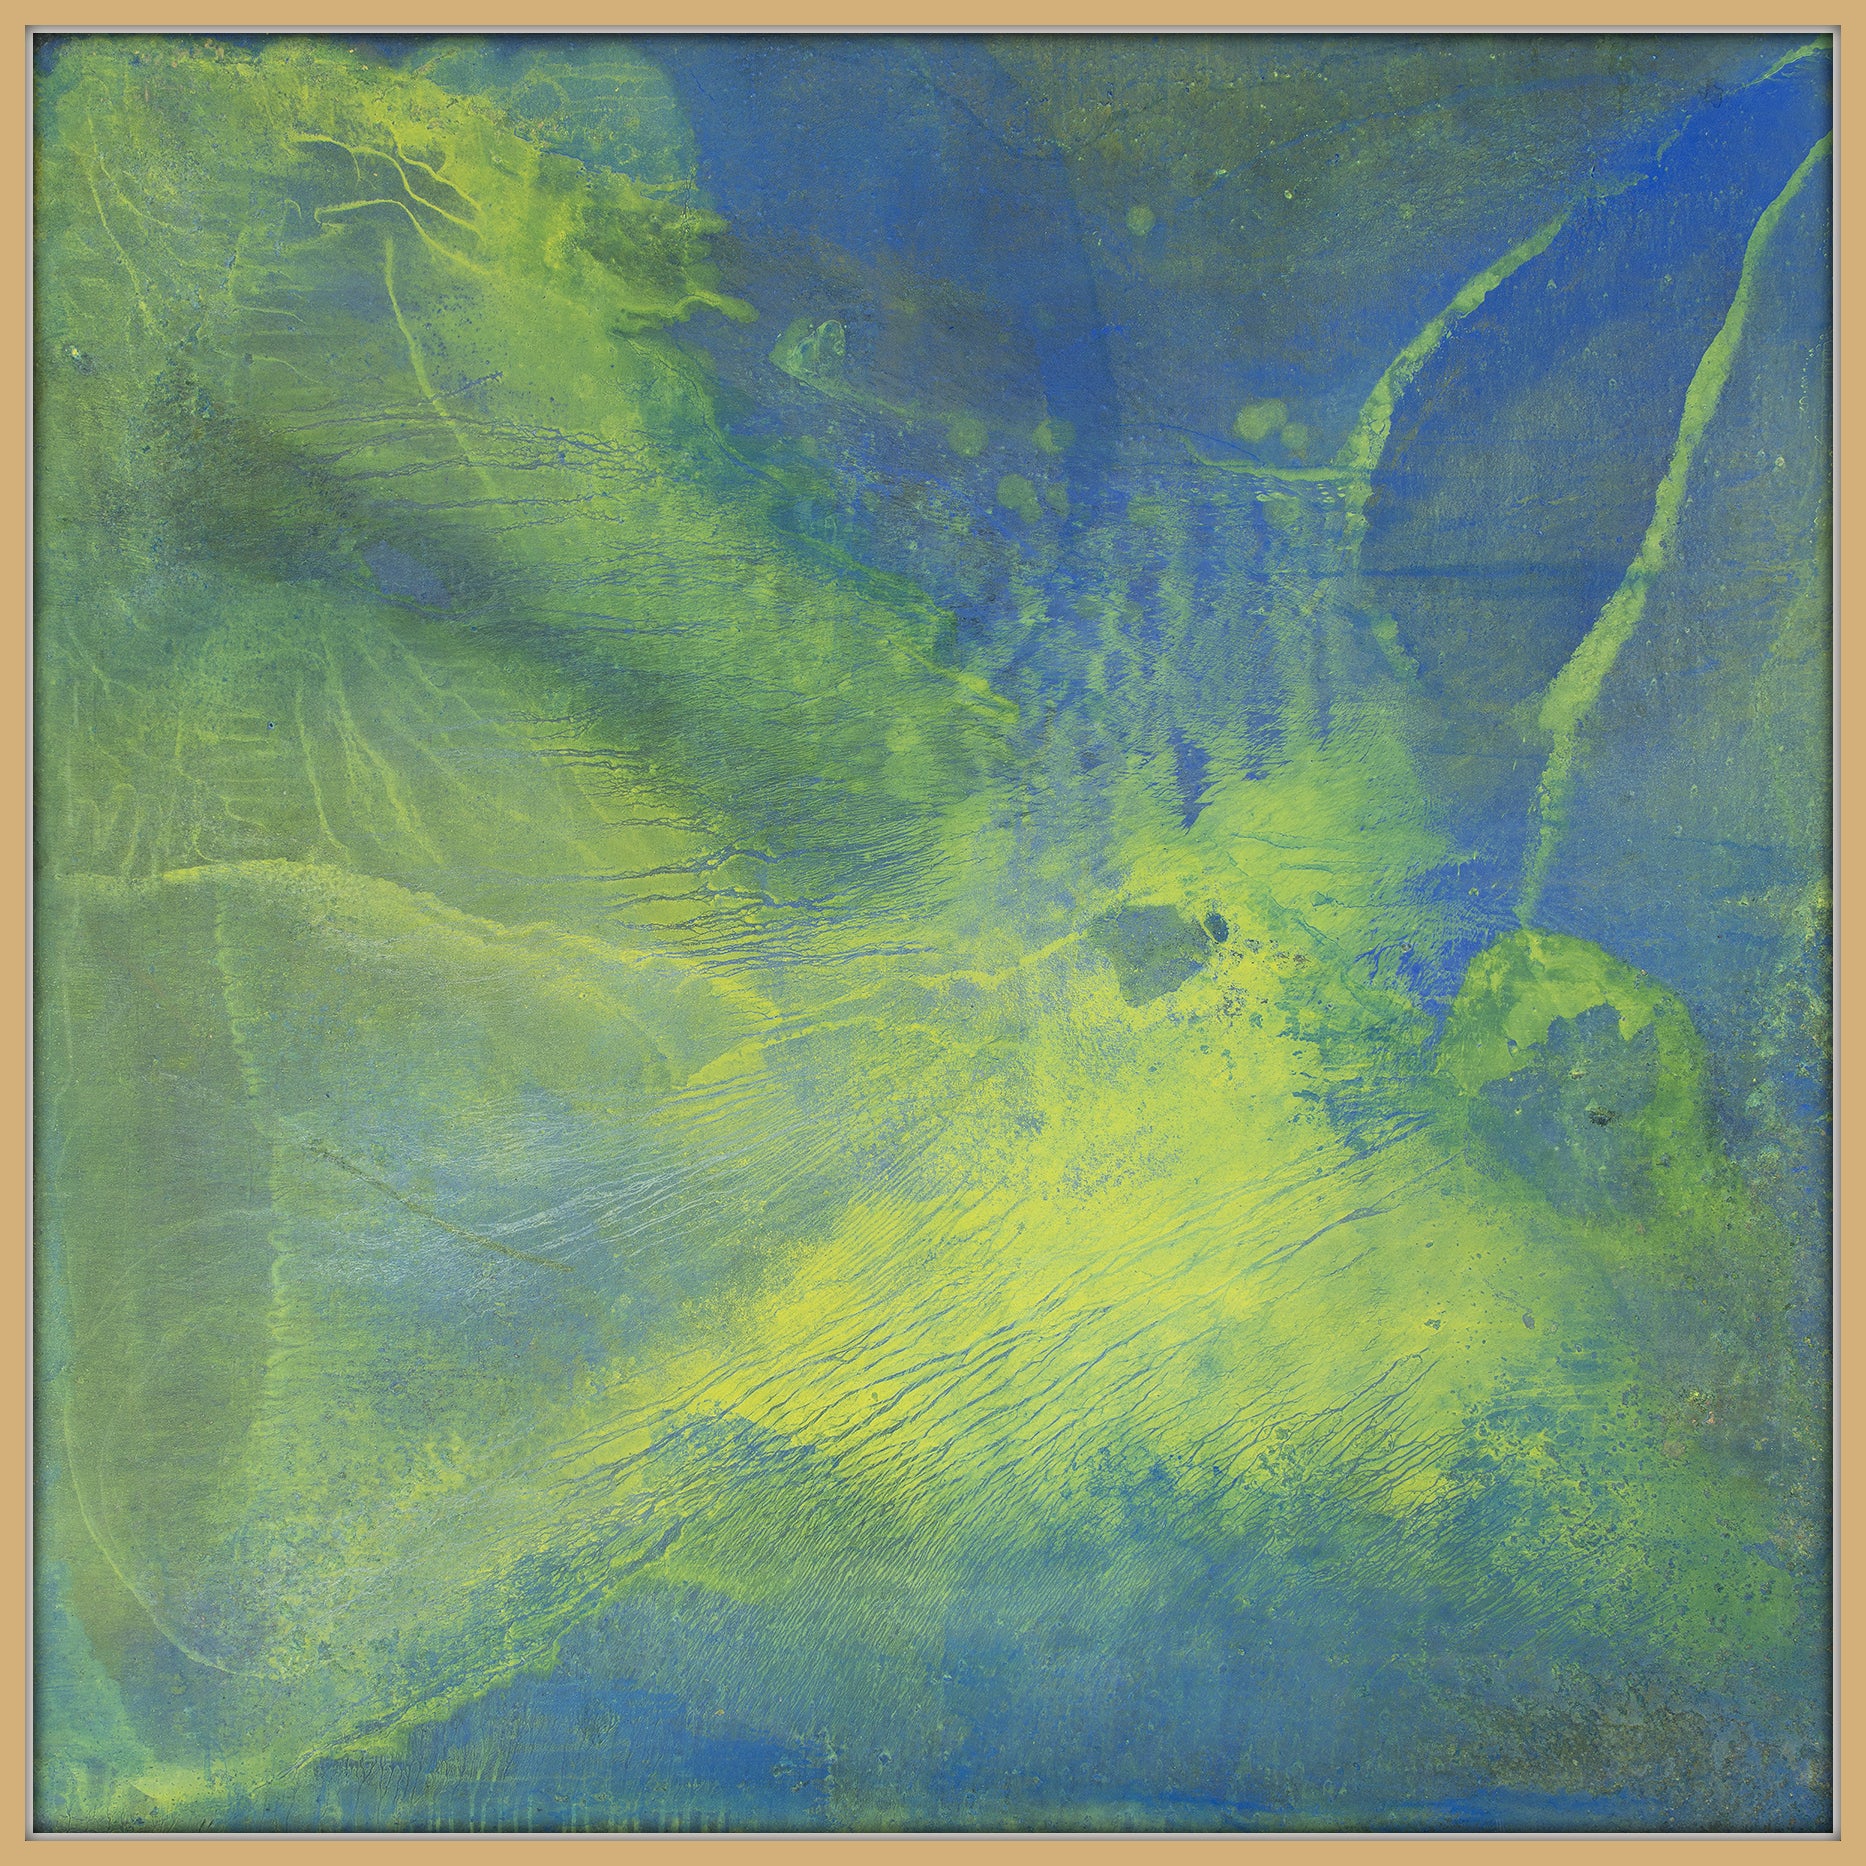 Green Machine, an oil on canvas original by Seth B Minkin, featuring abstractions in blues, greens and gold